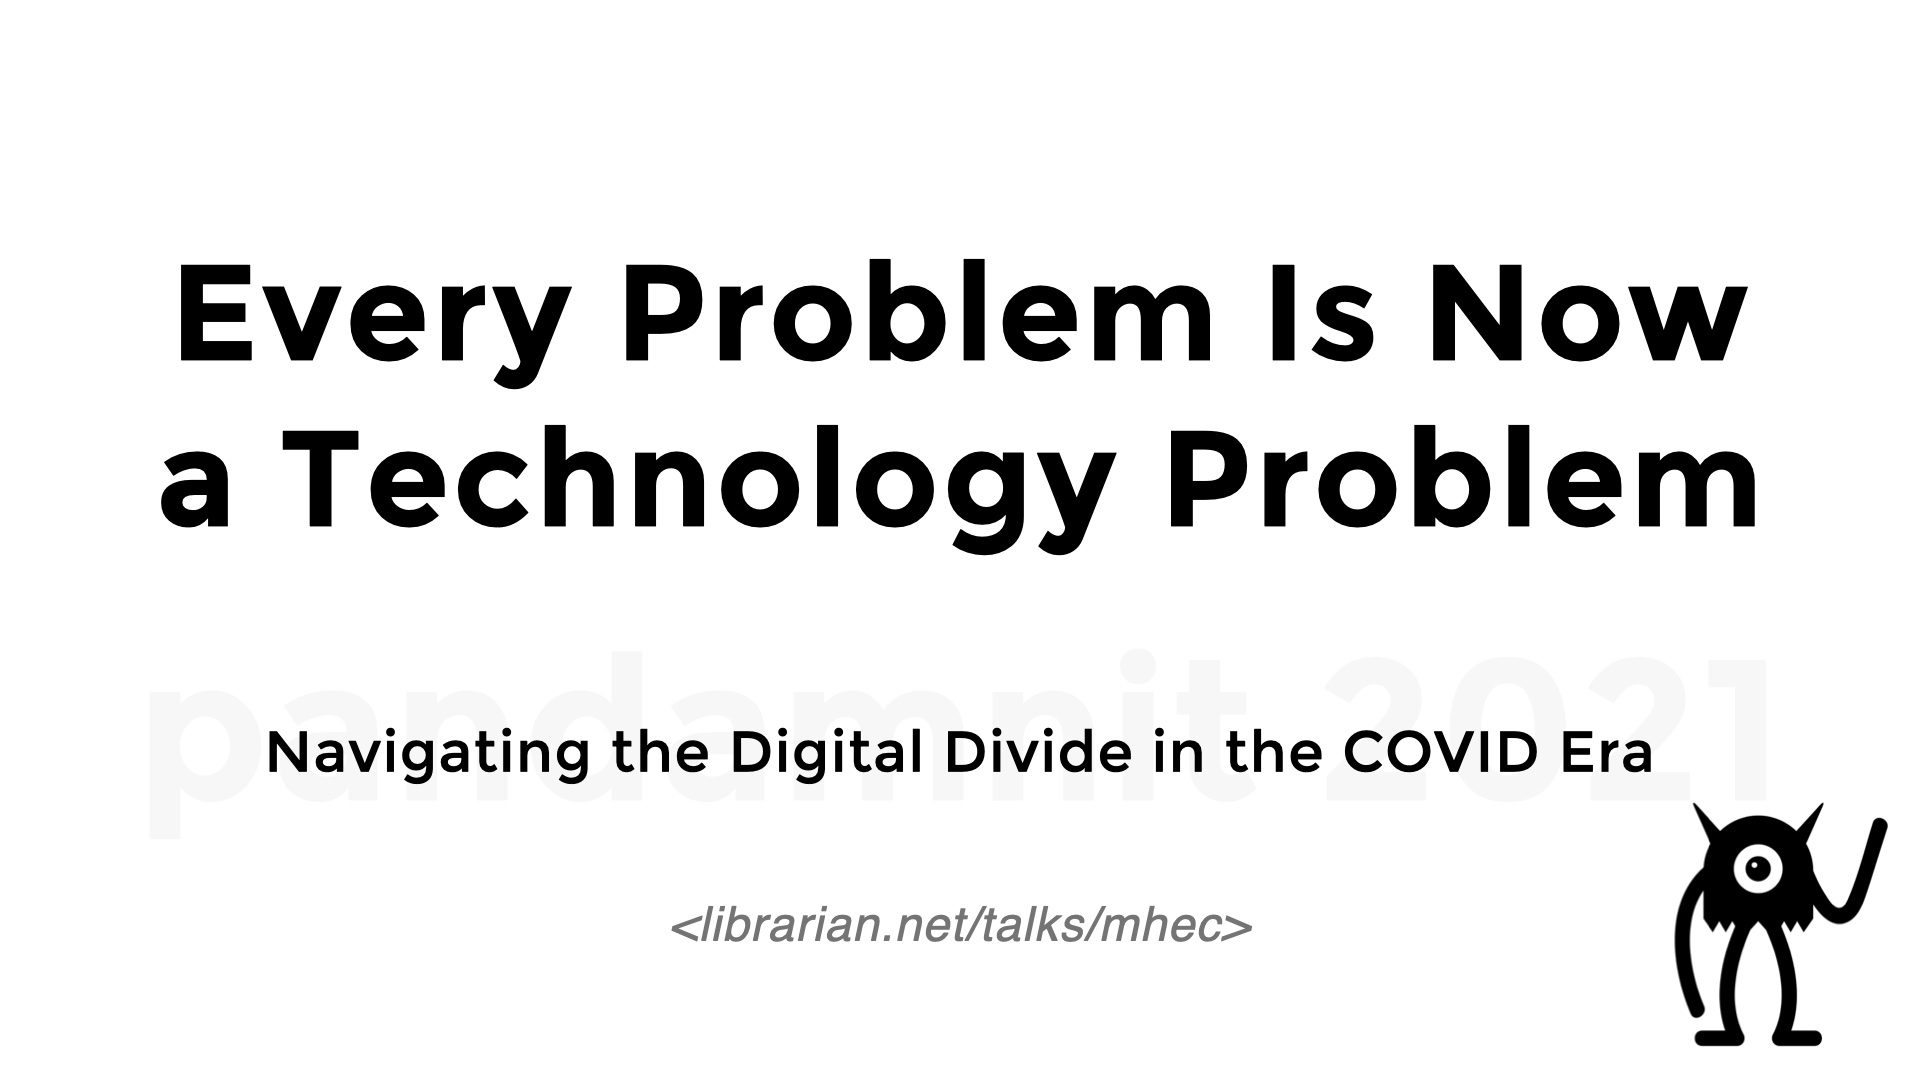 Title slide: Every Problem Is Now a Technology Problem. Subtitle: Navigating the Digital Divide in the COVID Era 